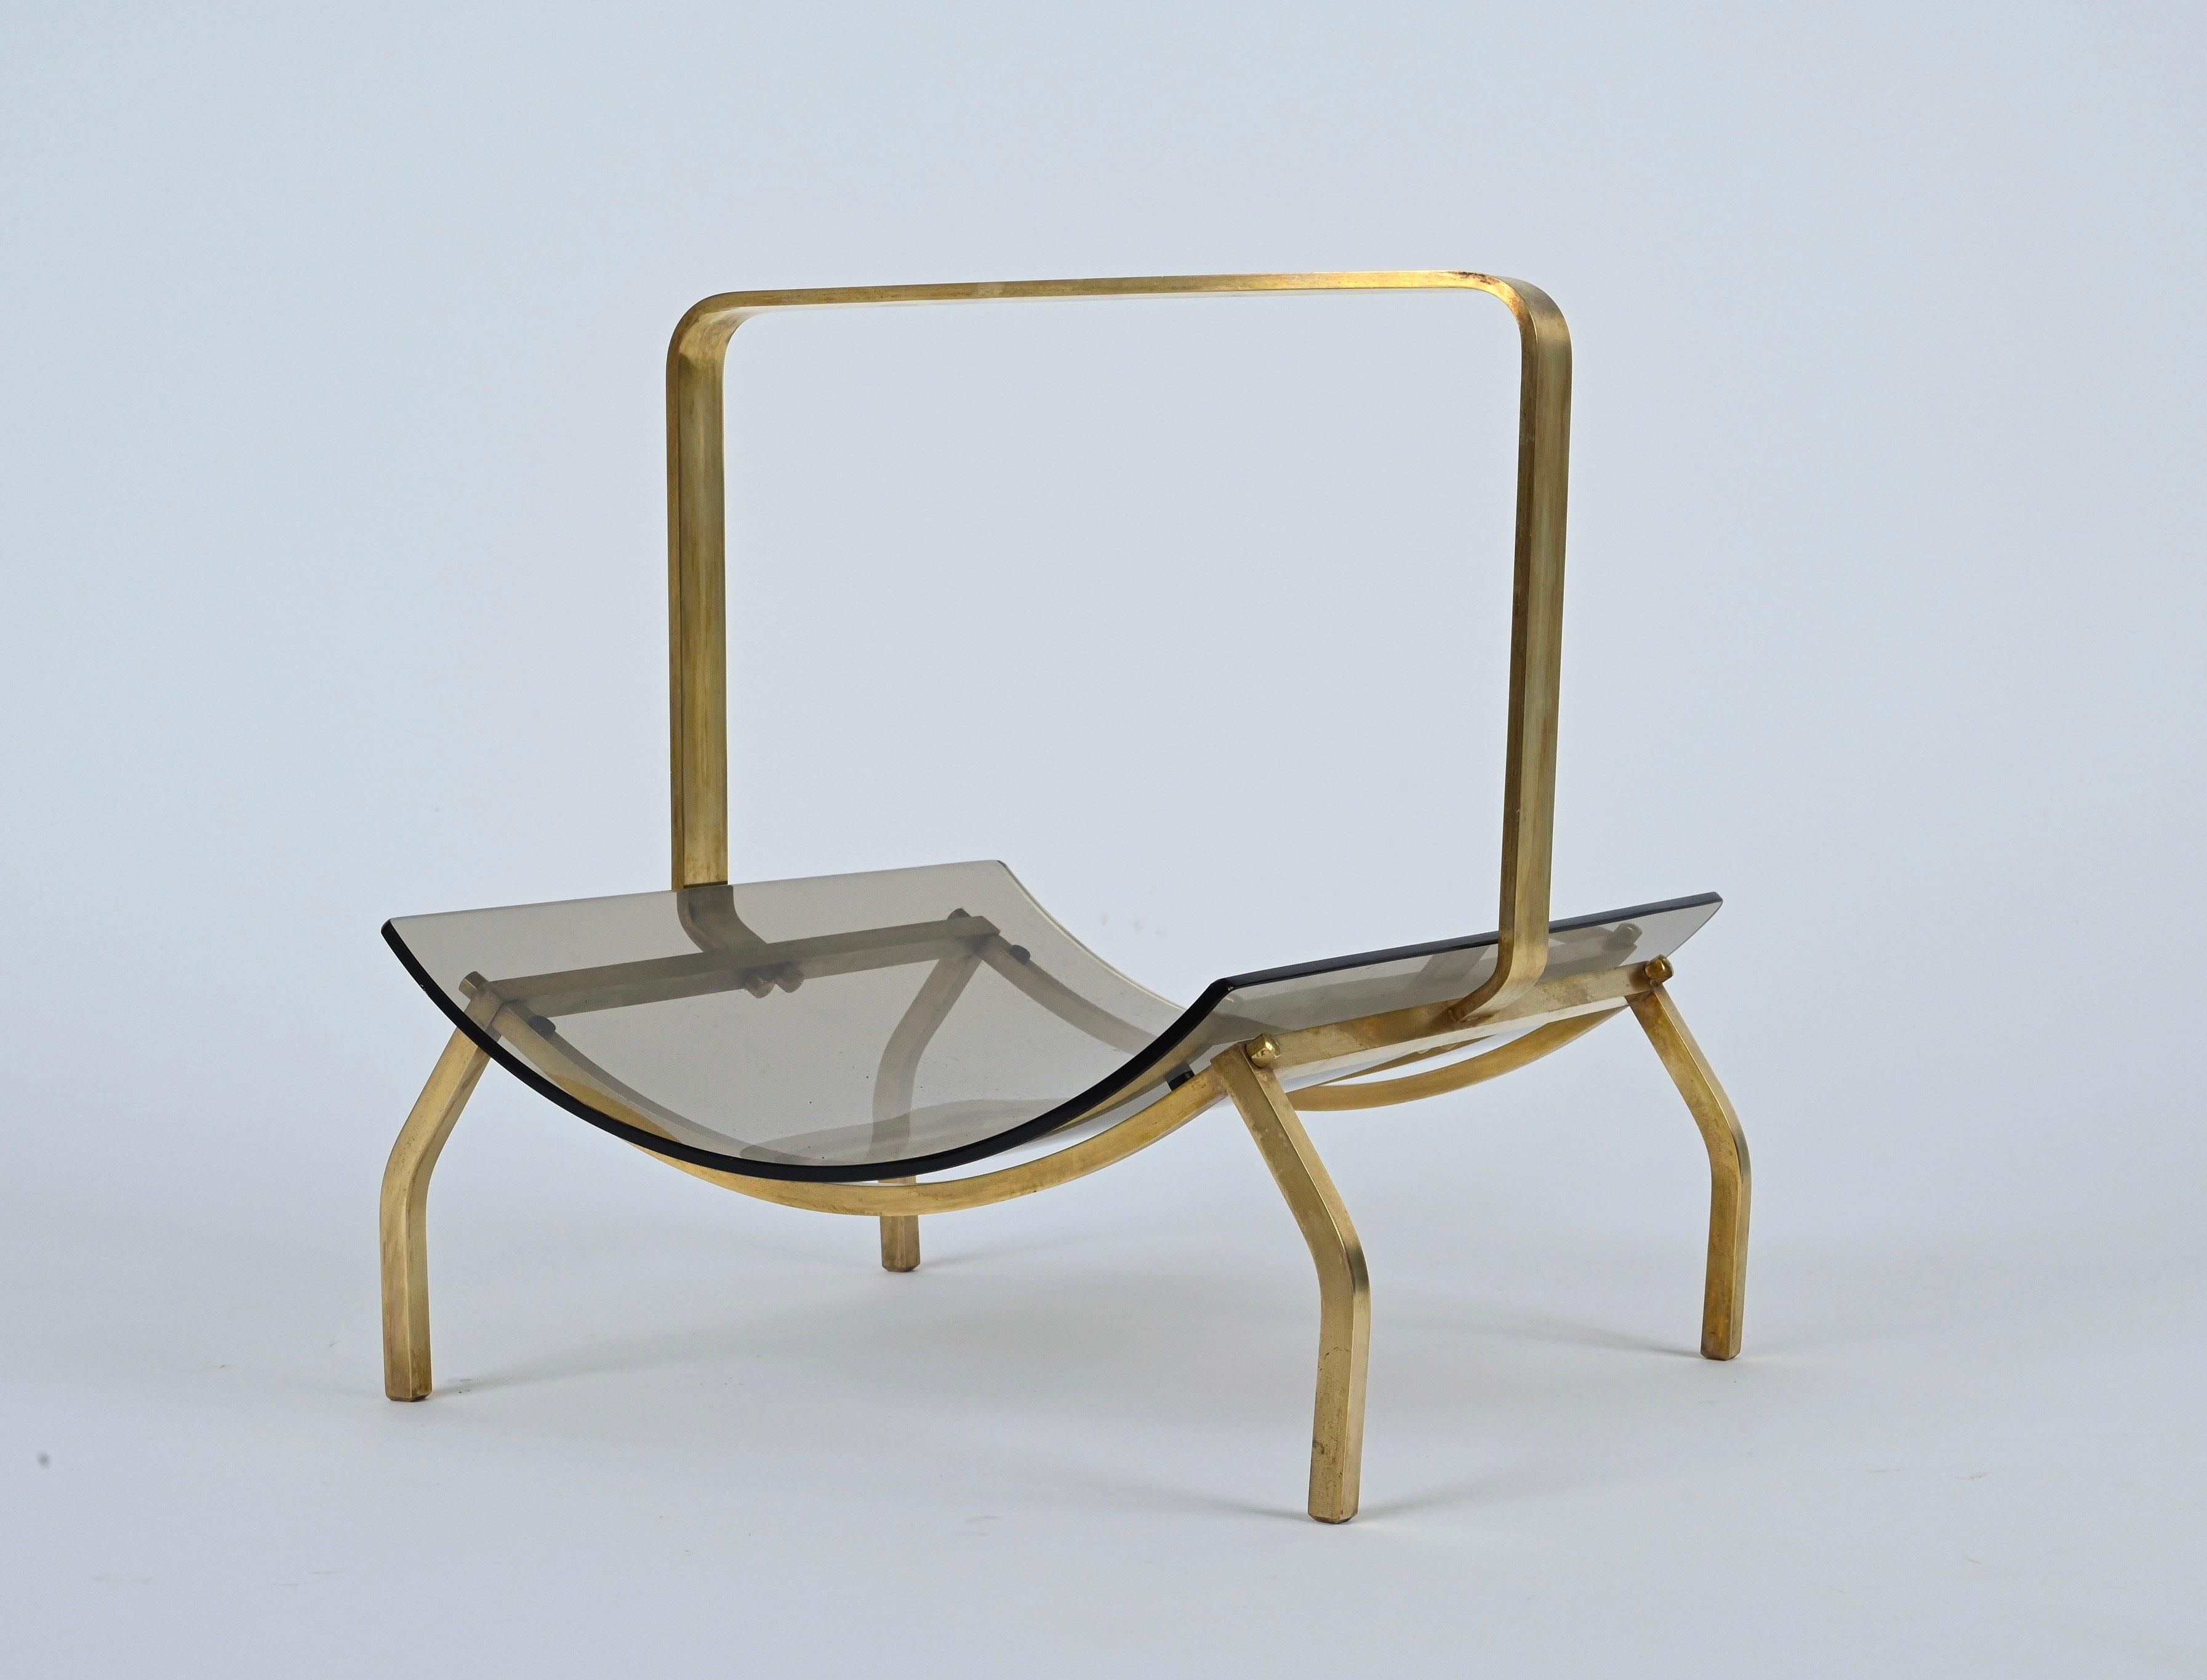 Beautiful Mid-Century Modern newspaper and magazine rack designed and manufactured by Fontana Arte in the 1960s. It's made of solid brushed brass and thick smoked glass.

Dimensions:
H 39.5 cm / 15.5 in.
W 40 cm / 15.7 in.
D 38 cm / 114,96 in.